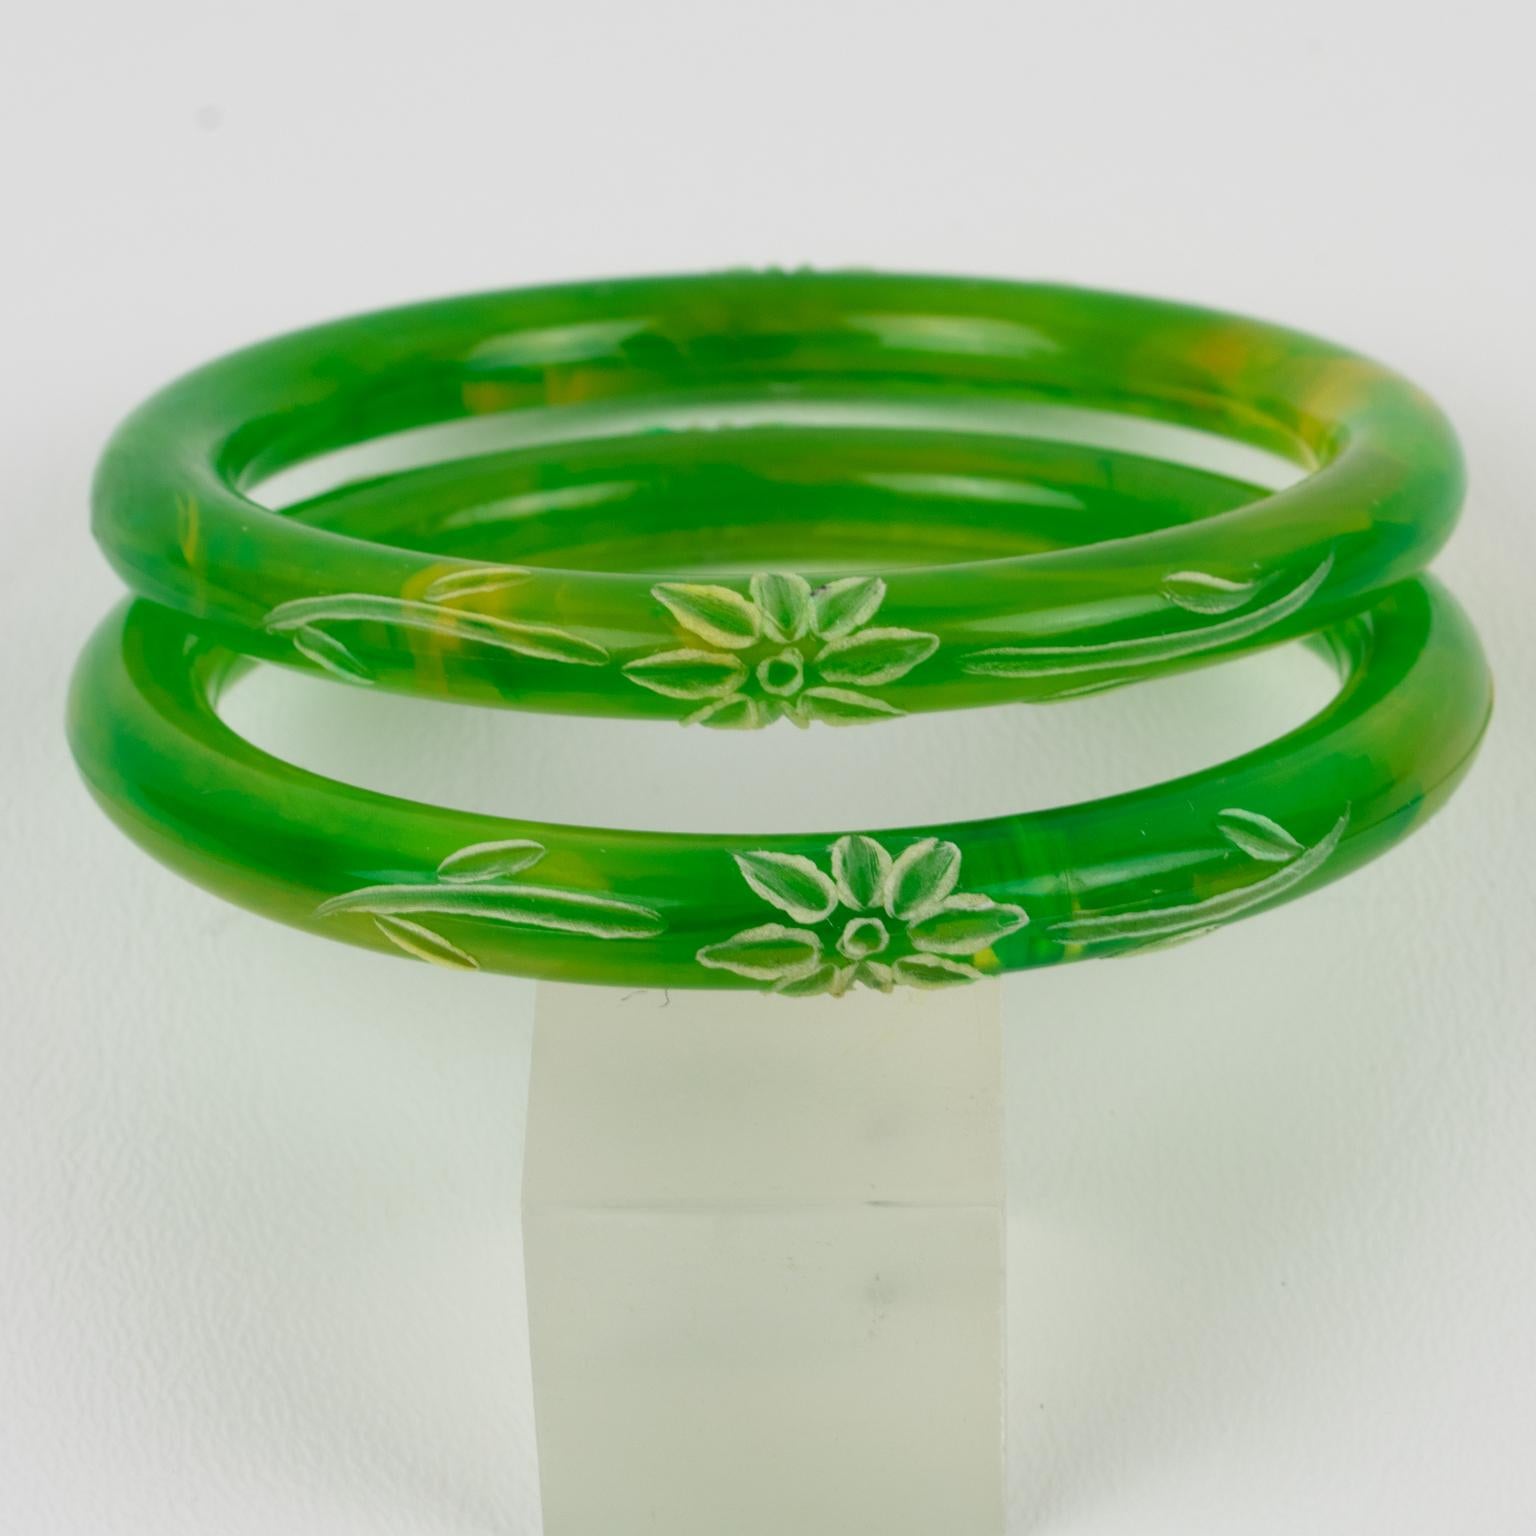 Lucite Bracelet Bangle Green Grass Swirl with Floral Carving, set of 2 pieces In Excellent Condition For Sale In Atlanta, GA